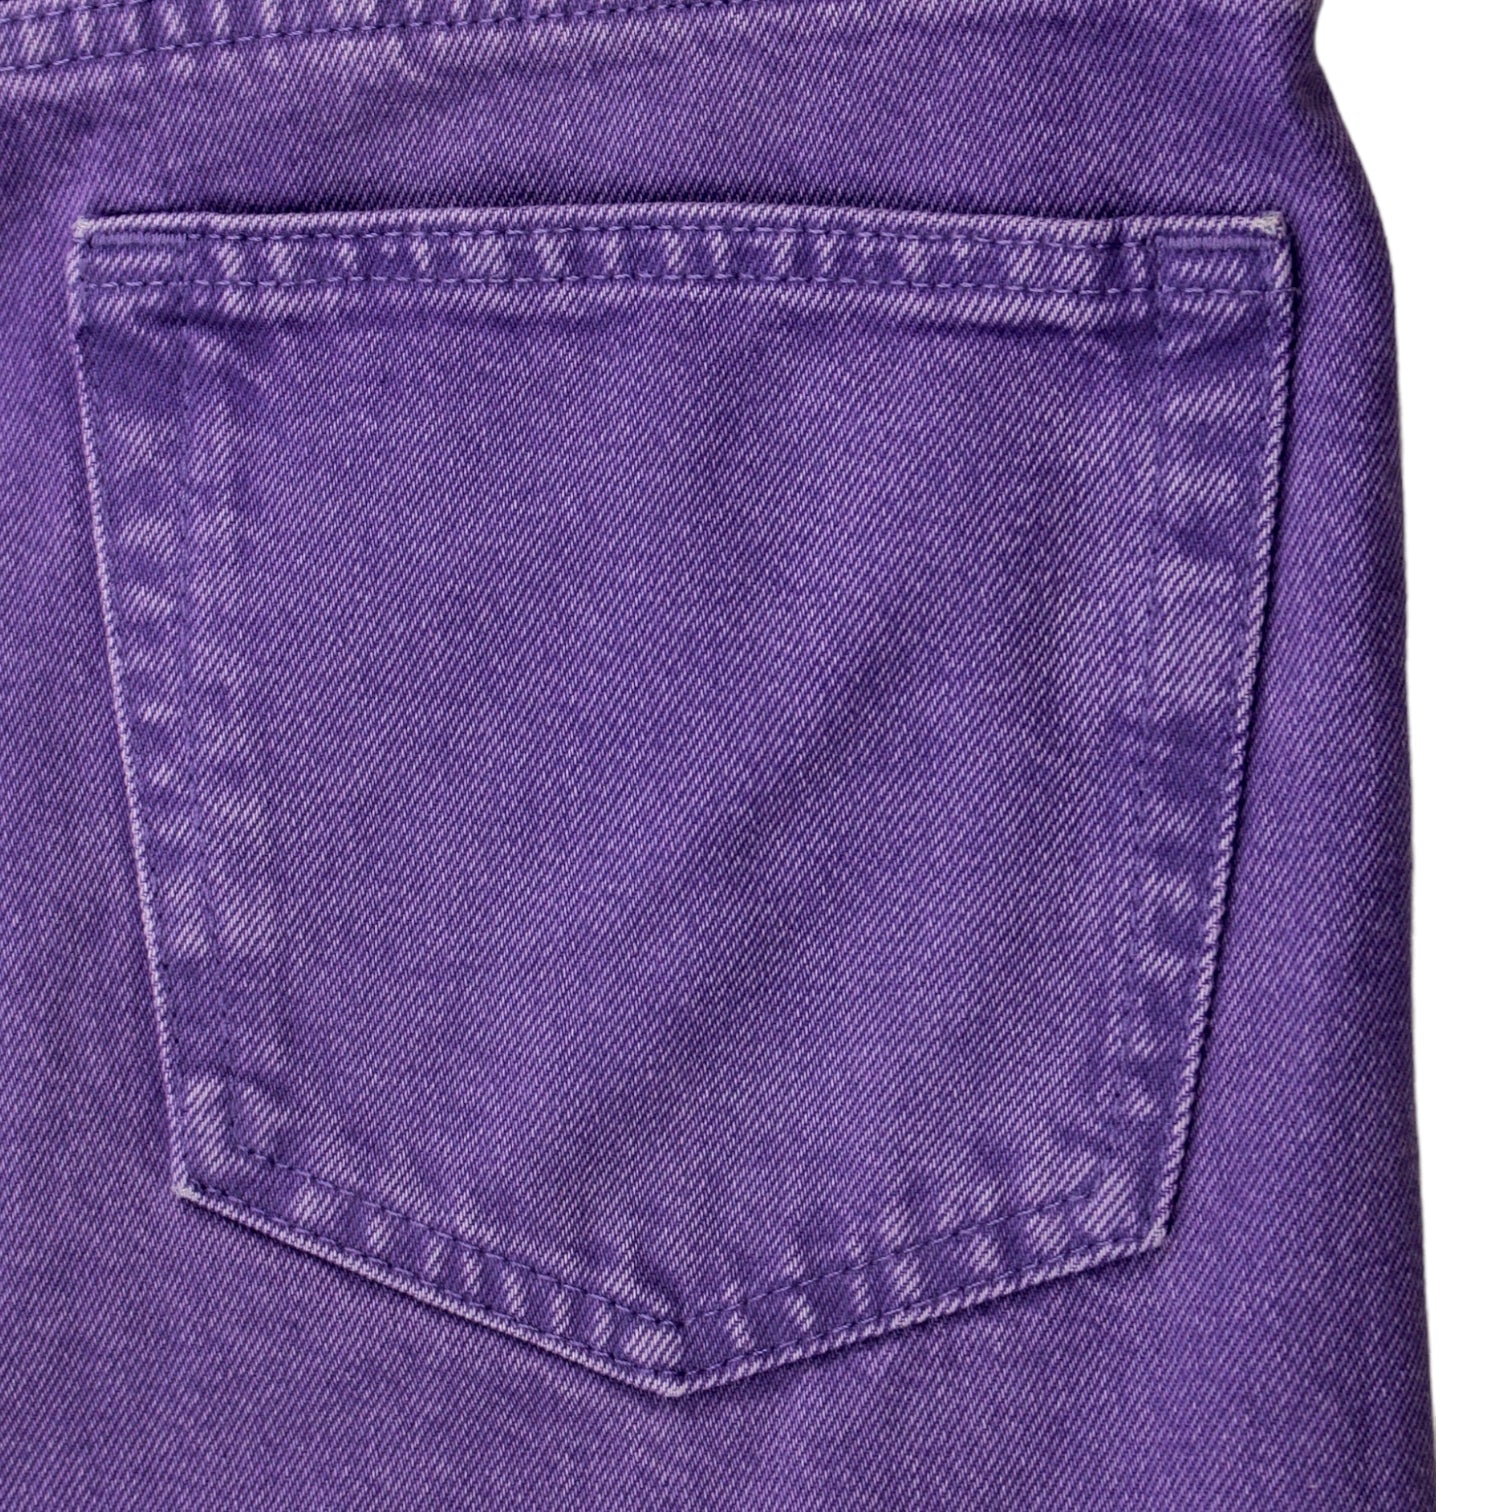 Weekday Purple Space Relaxed Jeans